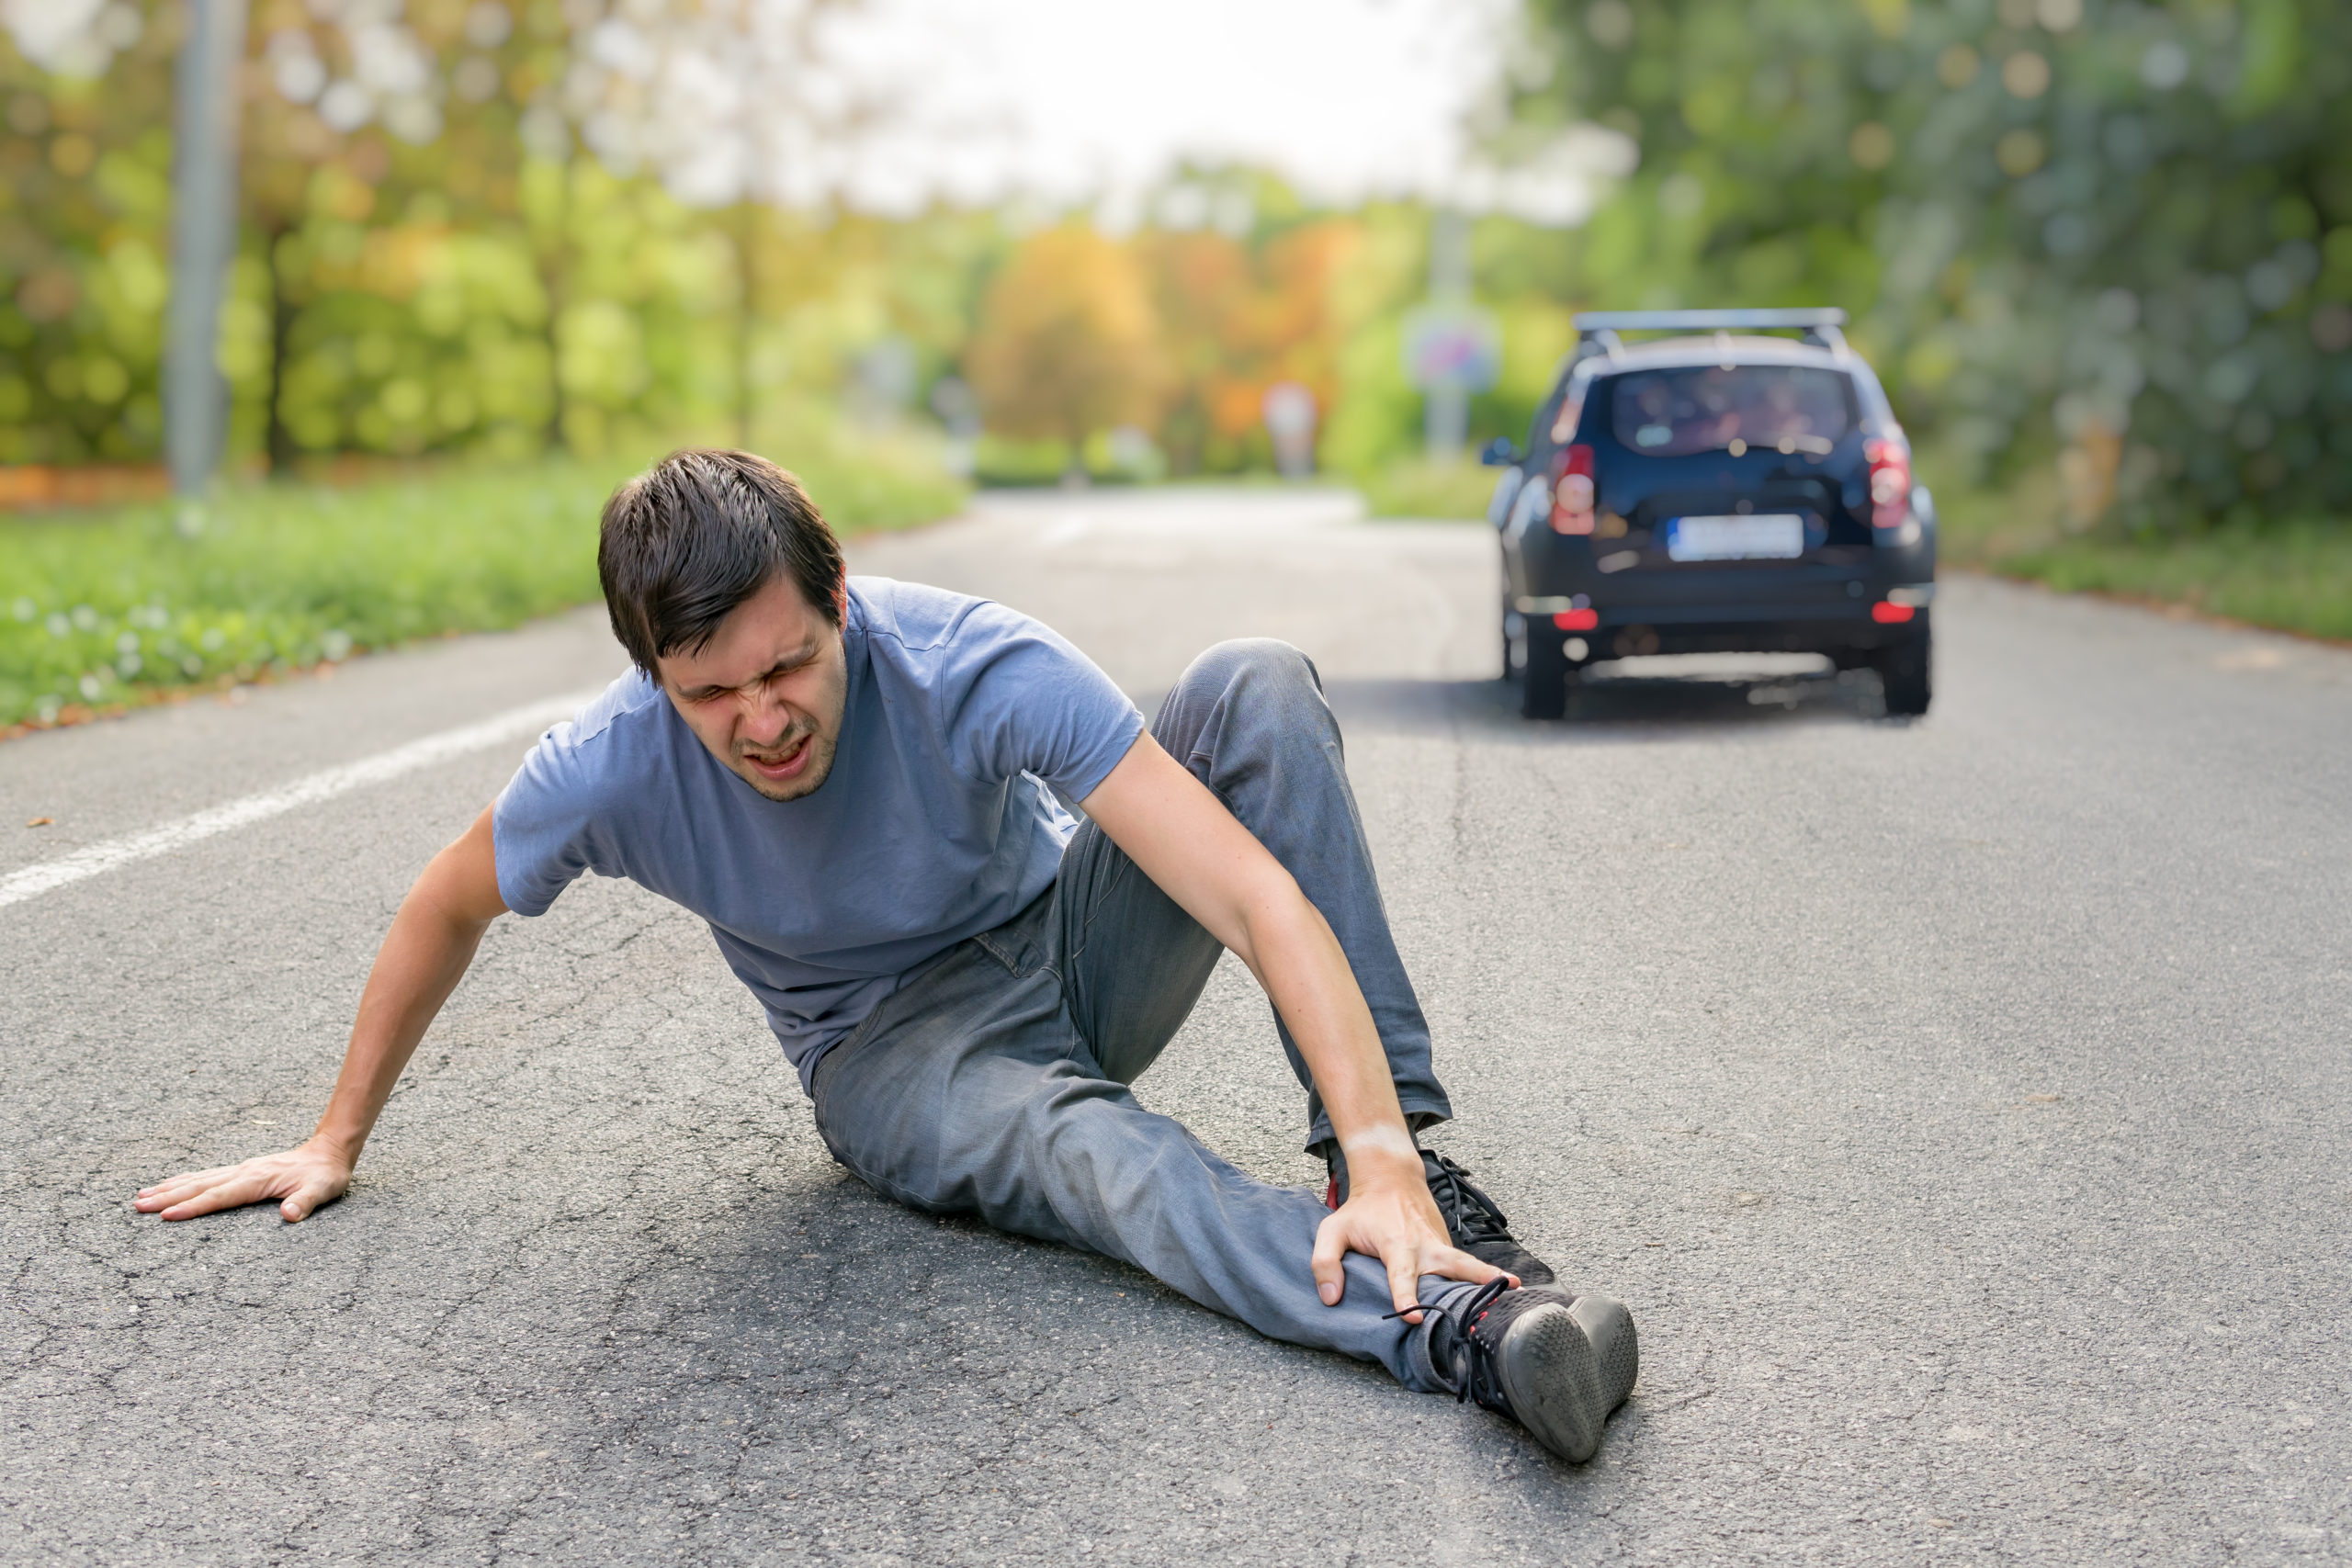 consequences of a hit-and-run accident